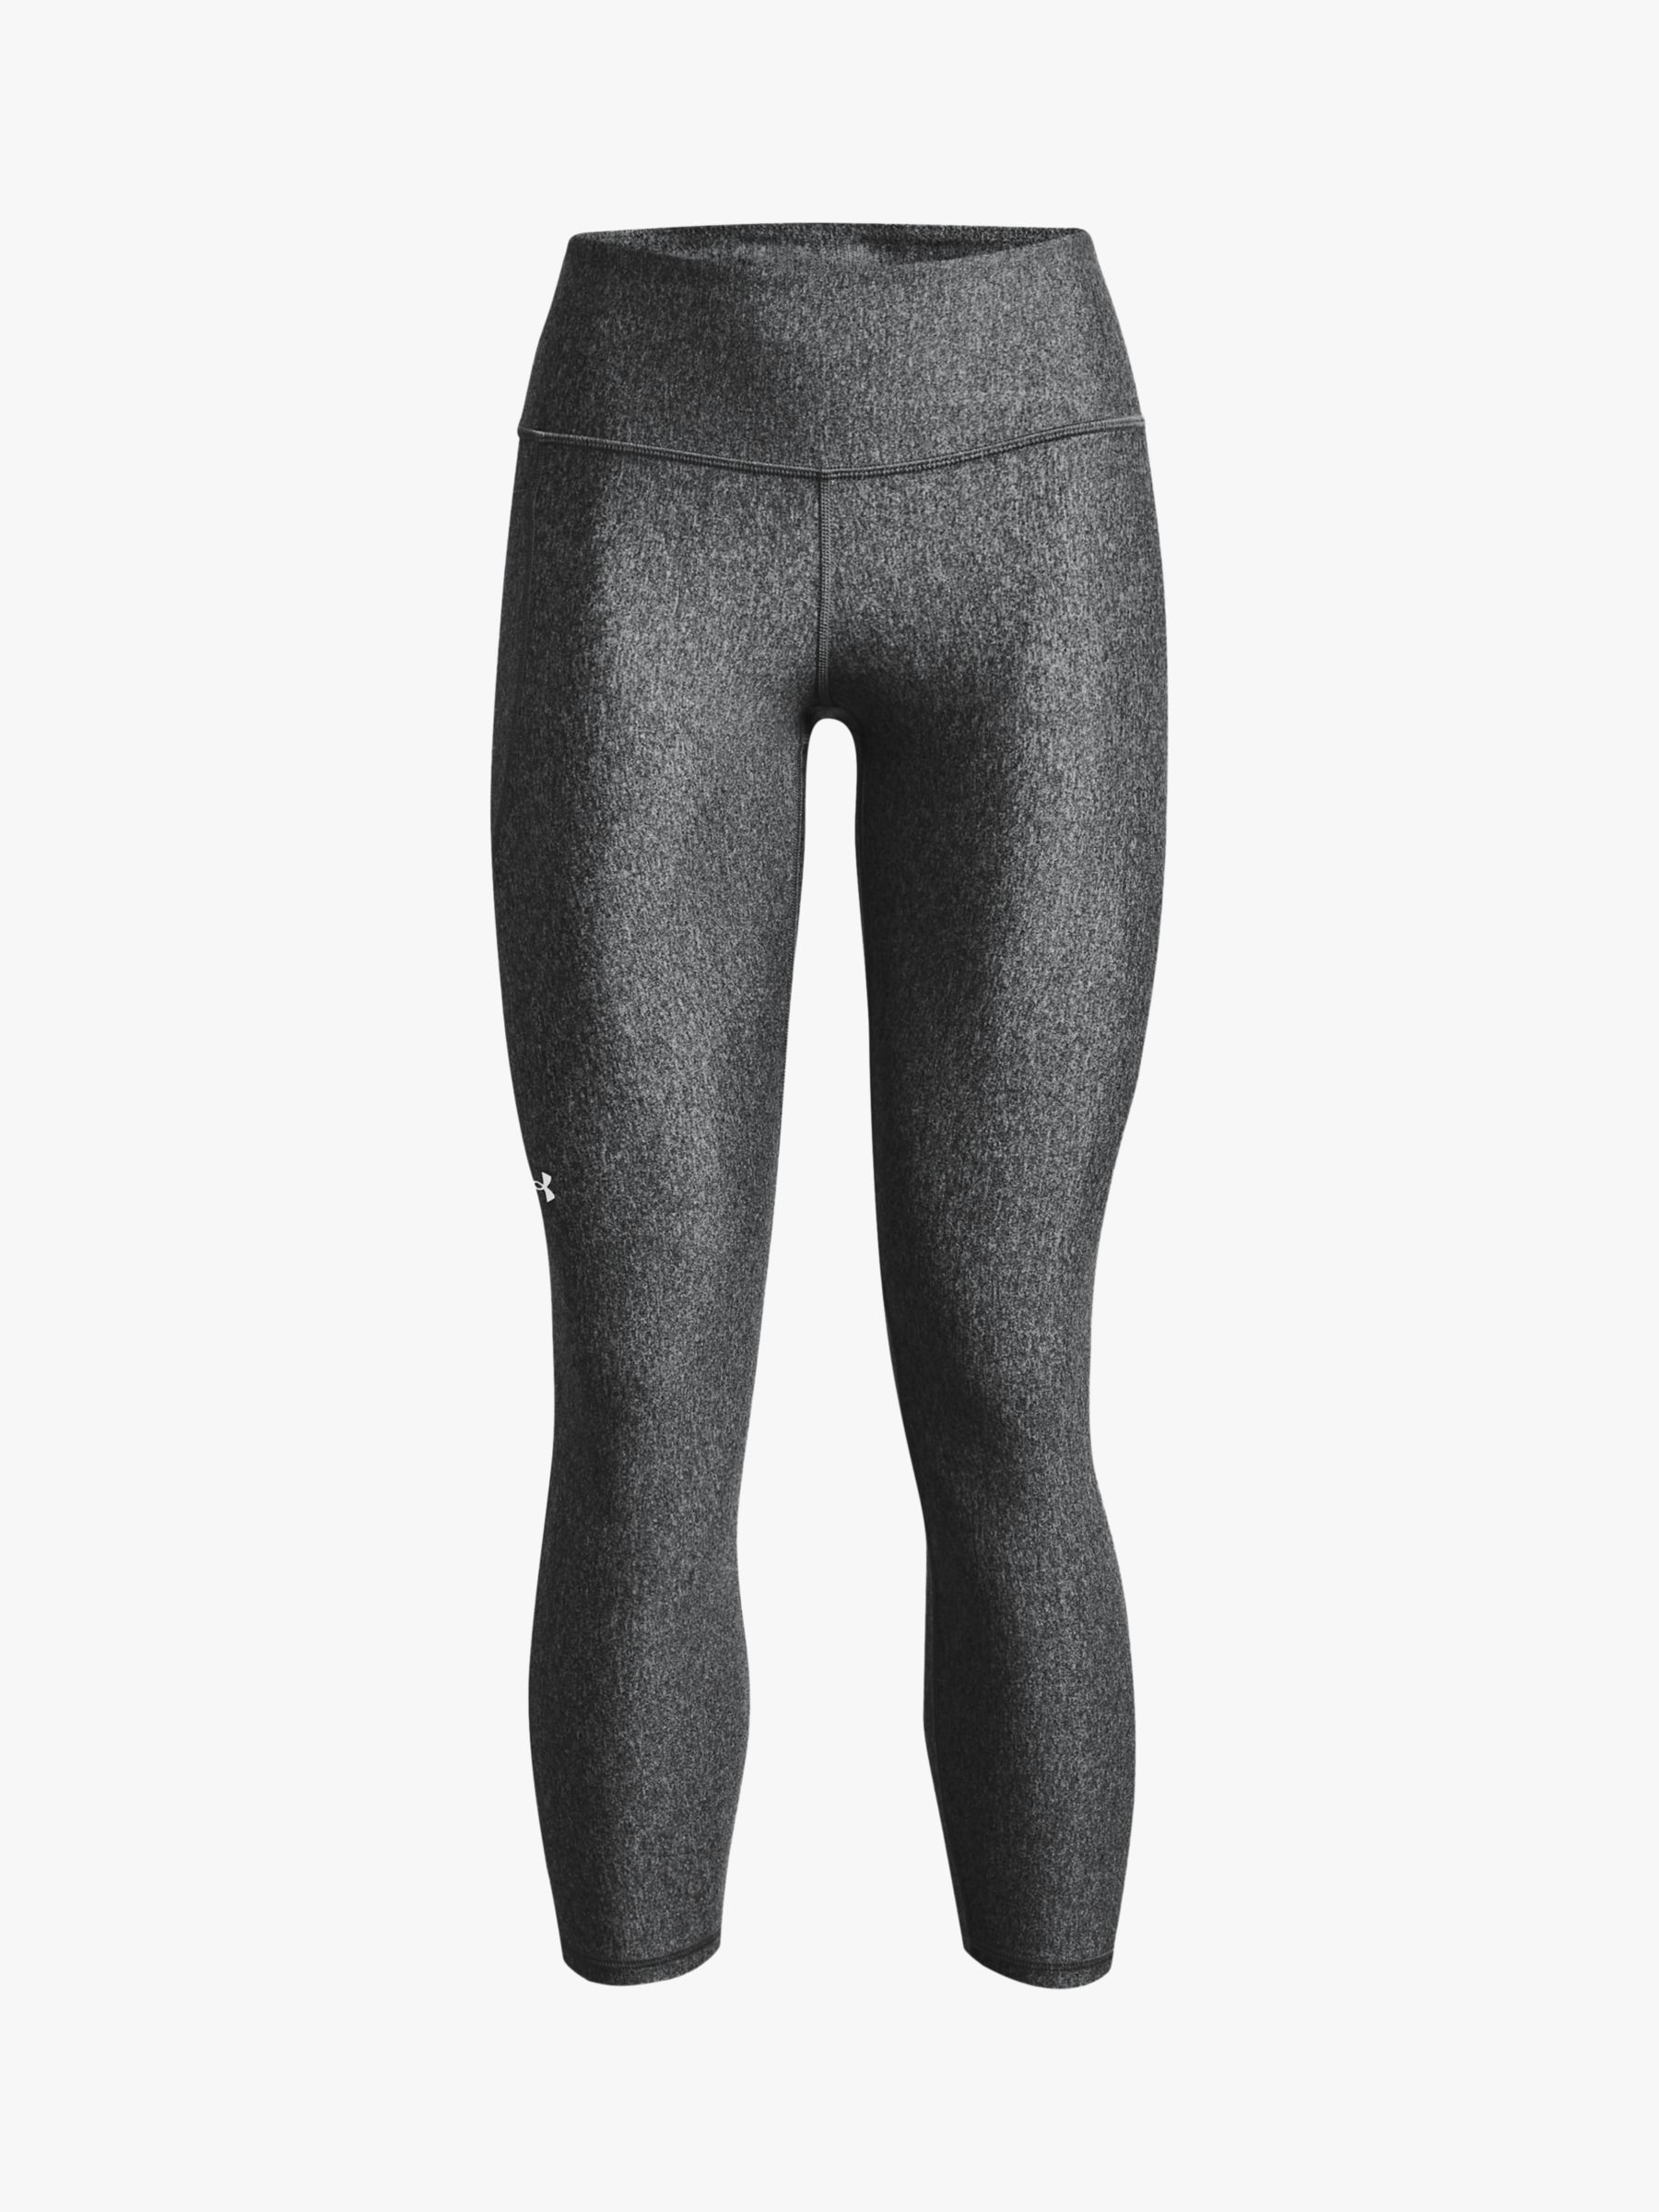 Under Armour Women's HeatGear High No-Slip Waistband Ankle Leggings : Buy  Online at Best Price in KSA - Souq is now : Fashion